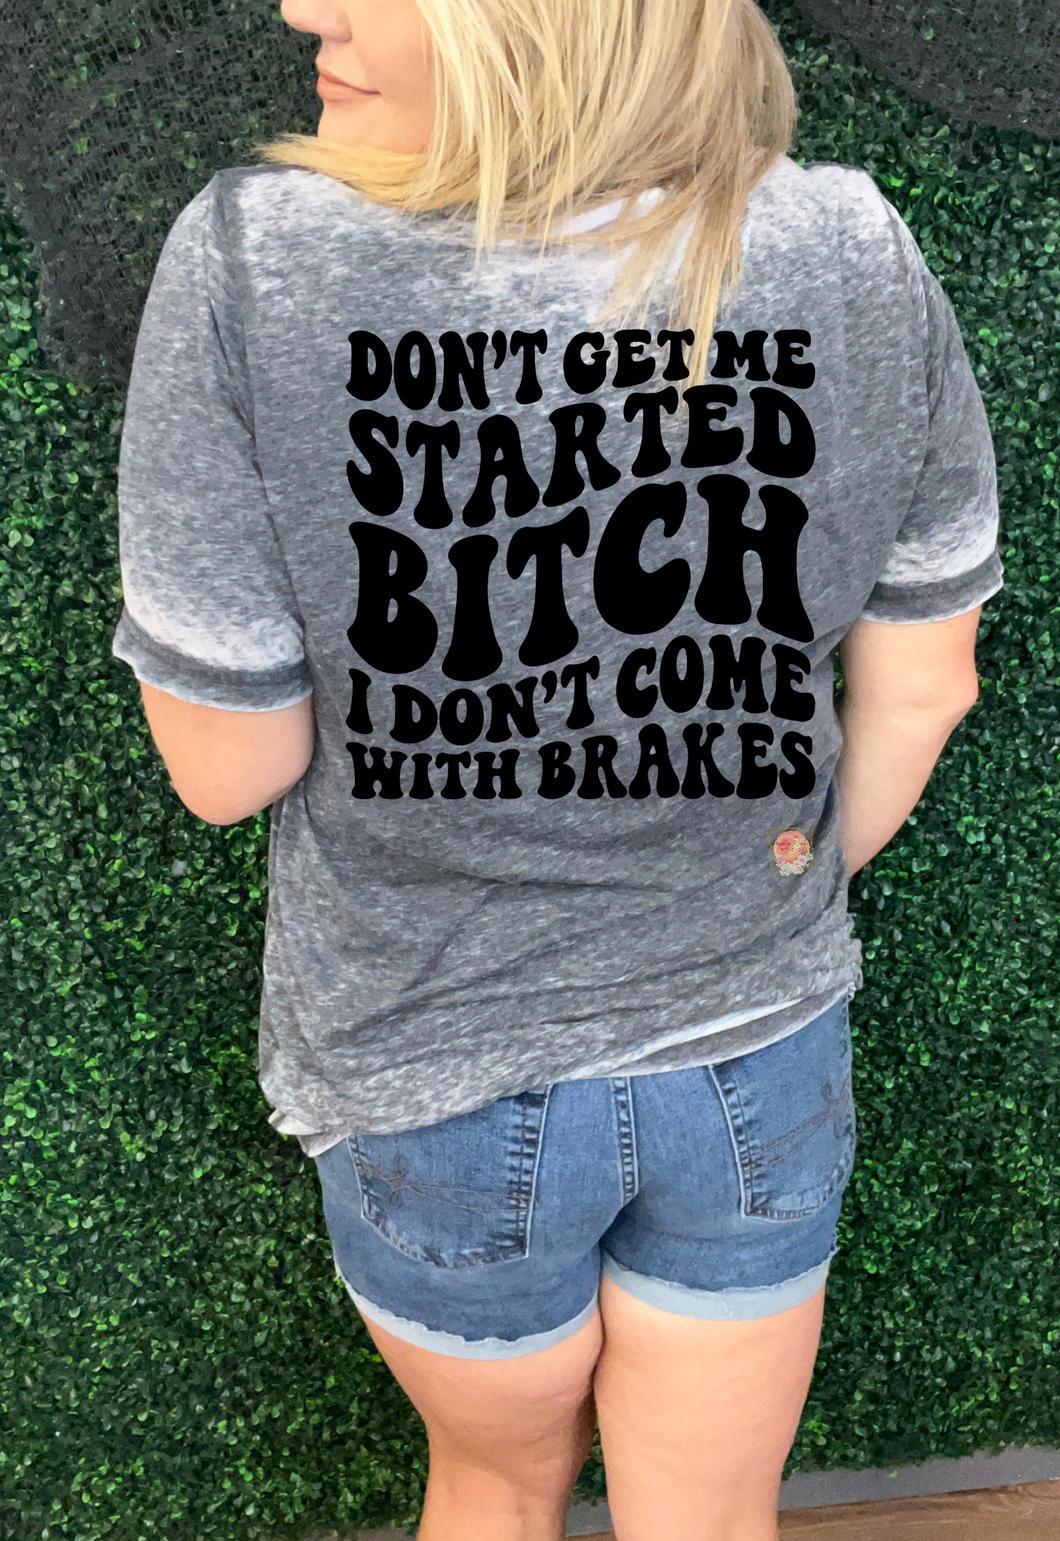 Don’t get me started bitch I don’t come with brakes￼